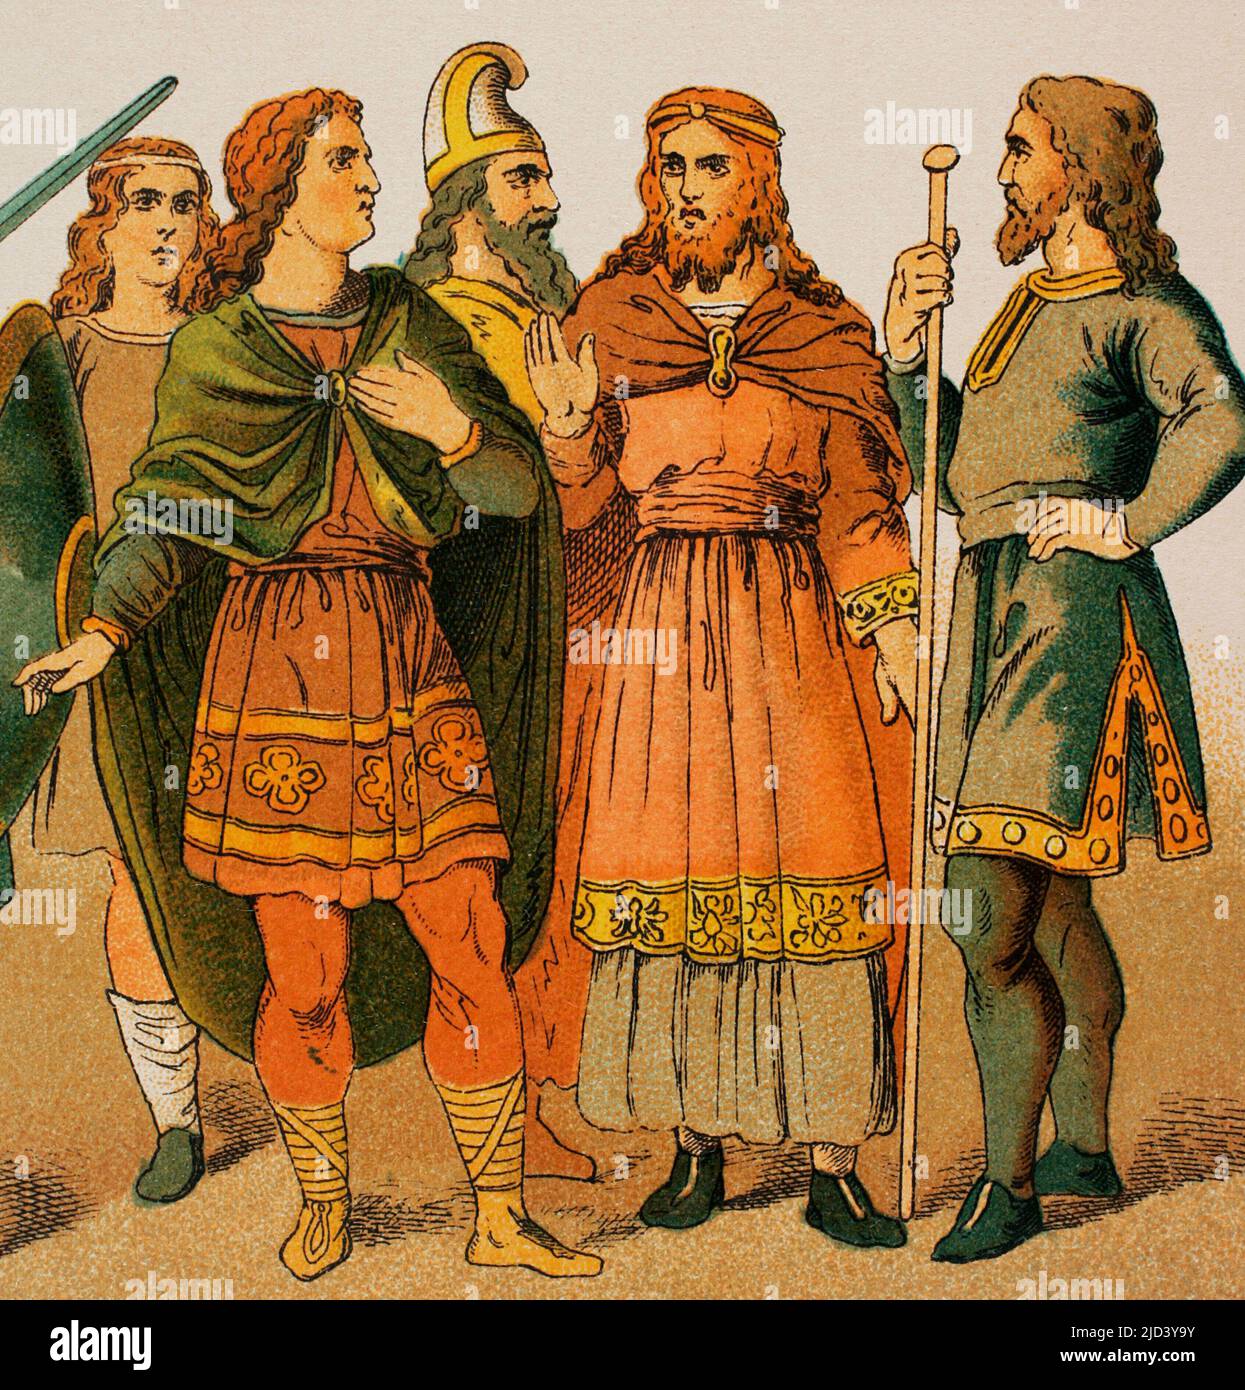 Anglo-Saxons (500-1000). Nobles. Chromolithography. 'Historia Universal' (Universal History), by César Cantú. Volume IV. Published in Barcelona, 1881. Stock Photo